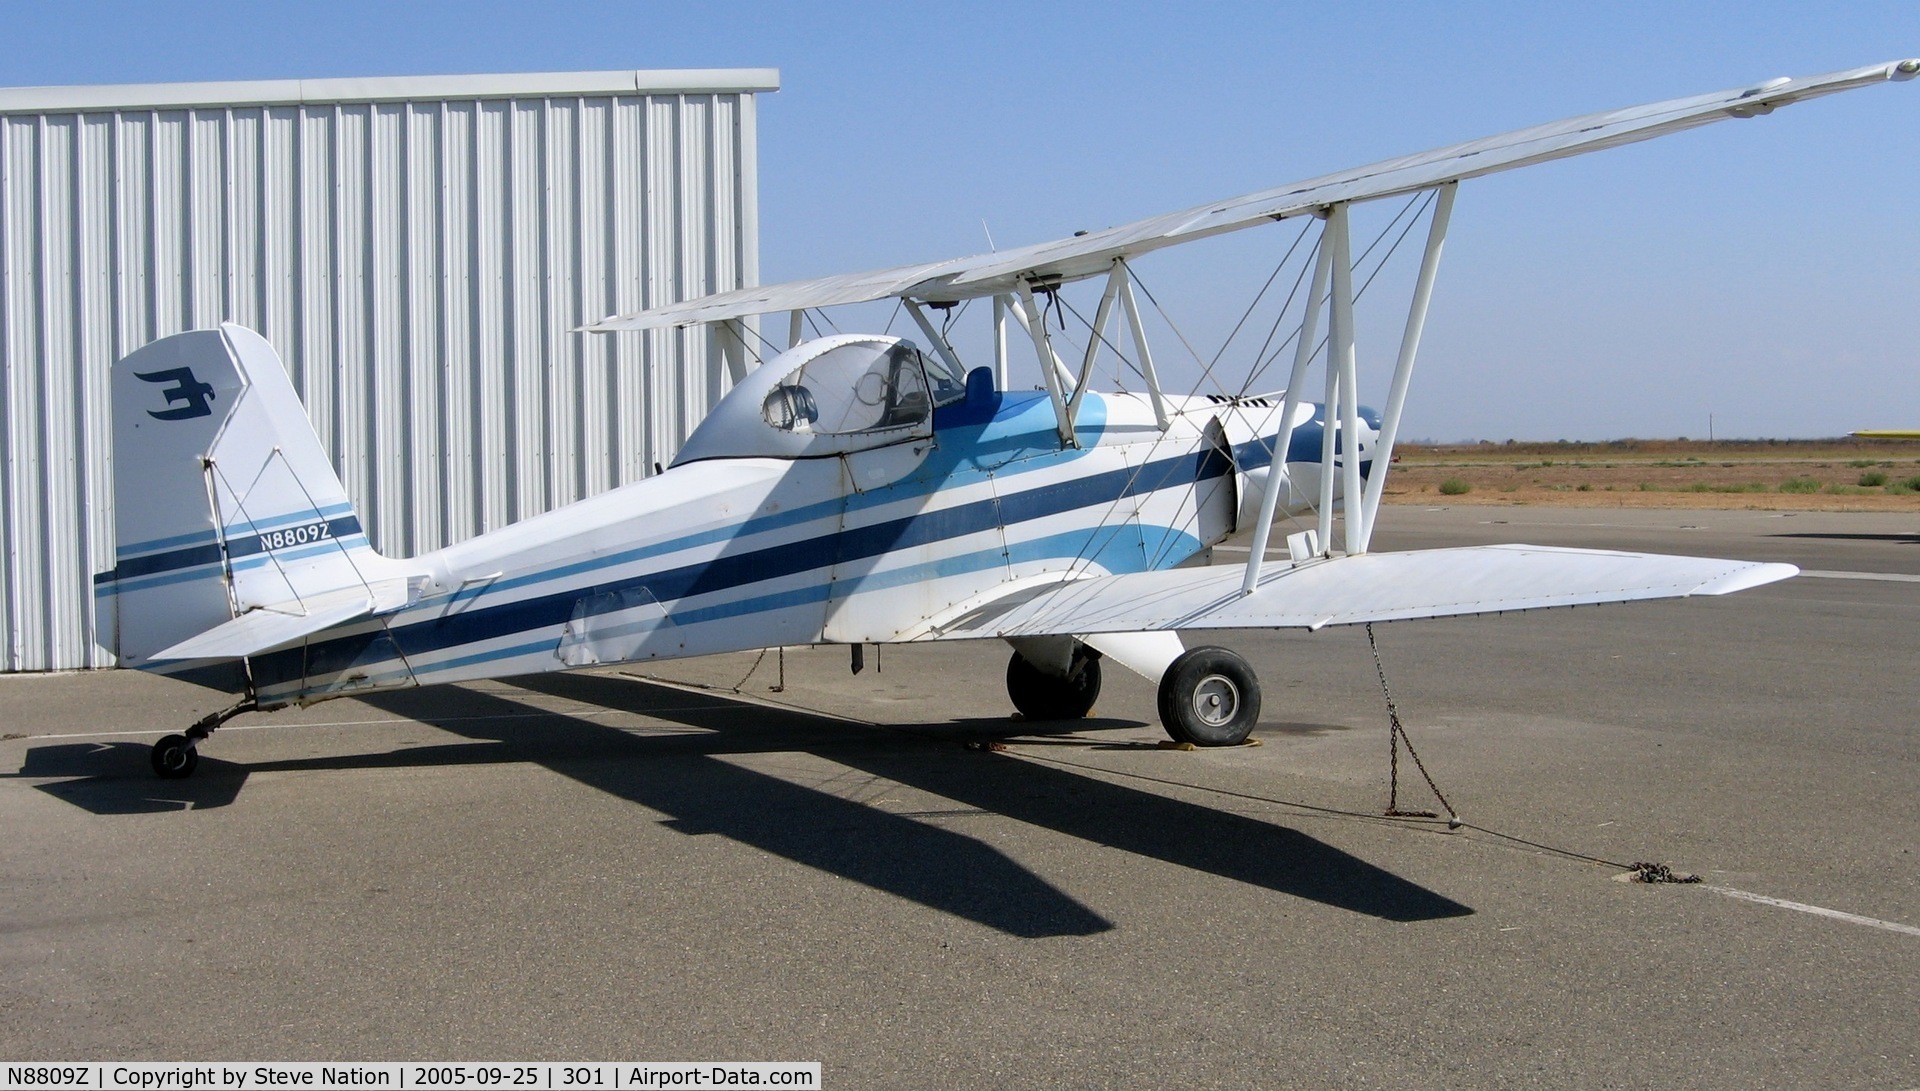 N8809Z, 1982 Eagle Aircraft Co EAGLE DW-1 C/N DW-1-0060-82, Newman A/S 1982 Eagle DW-1 crop duster out of service @ Gustine, CA